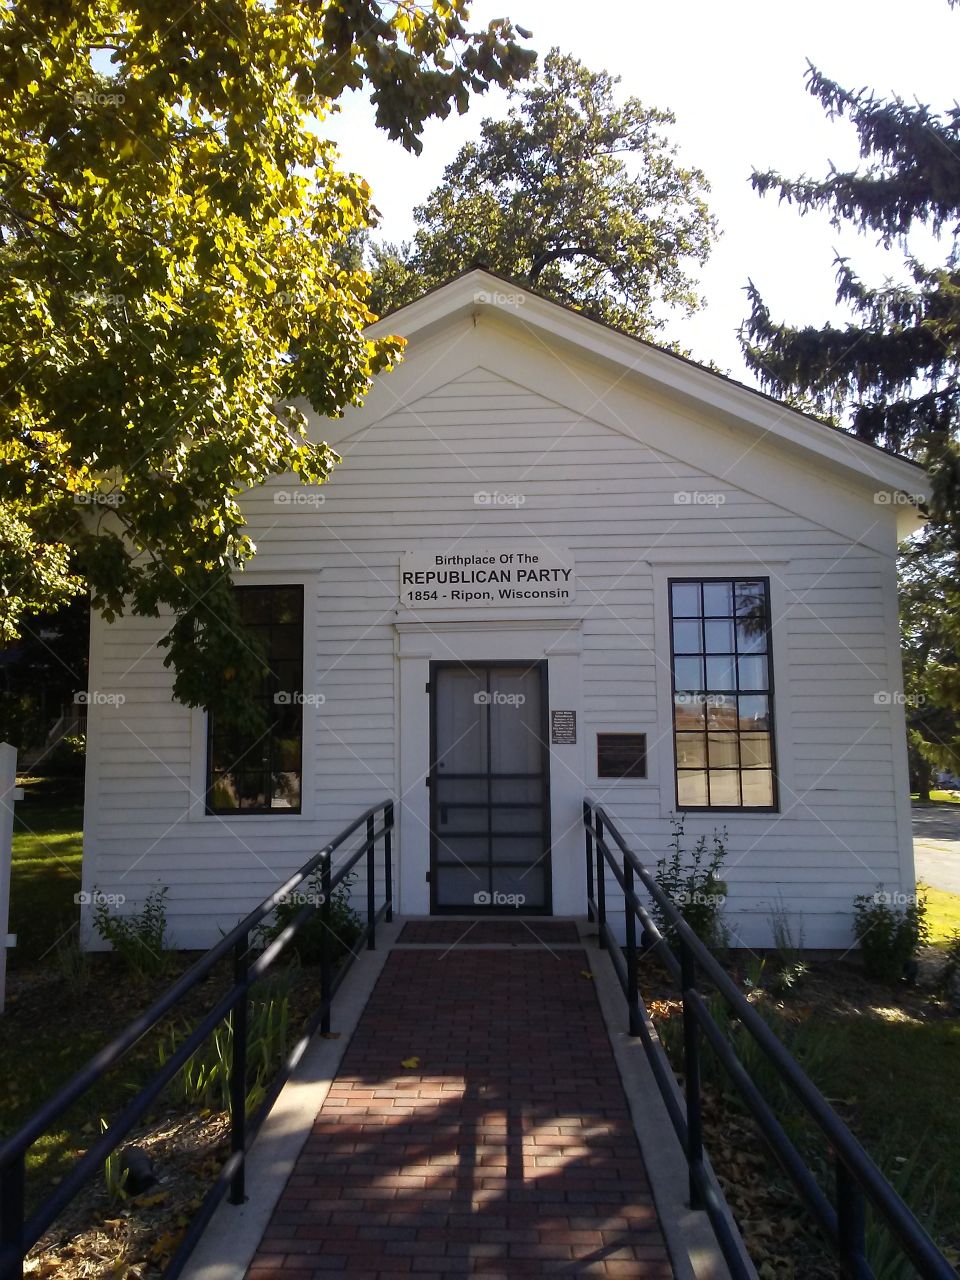 The Birthplace of the Republican Party Museum in Ripon,Wisconsin.